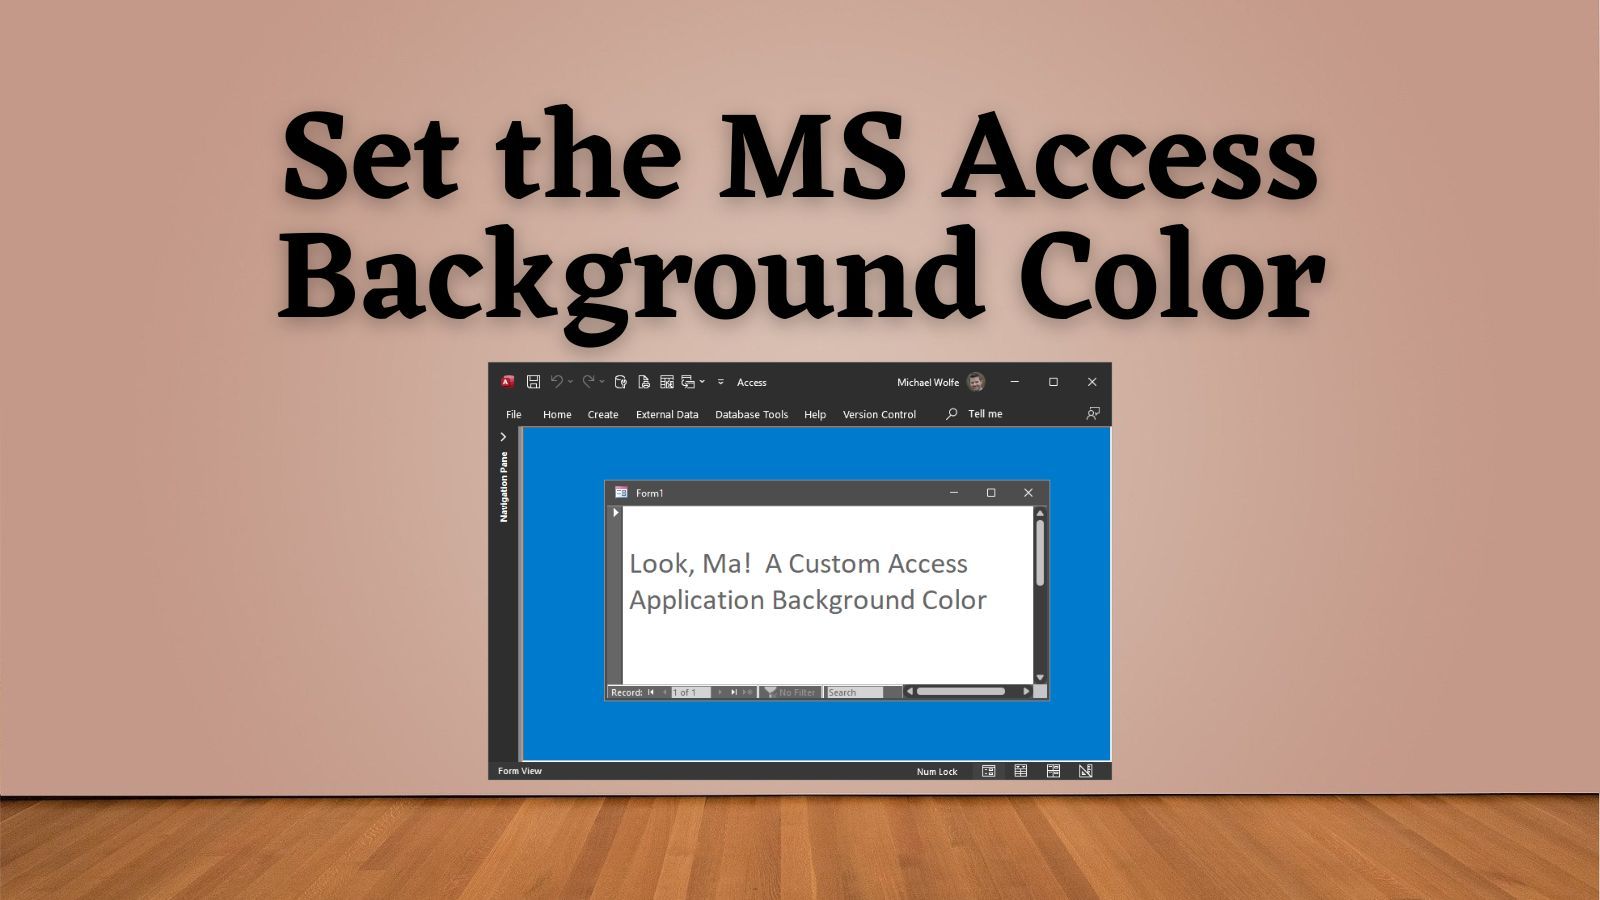 How to Set the Background Color of the Microsoft Access Application Window with VBA